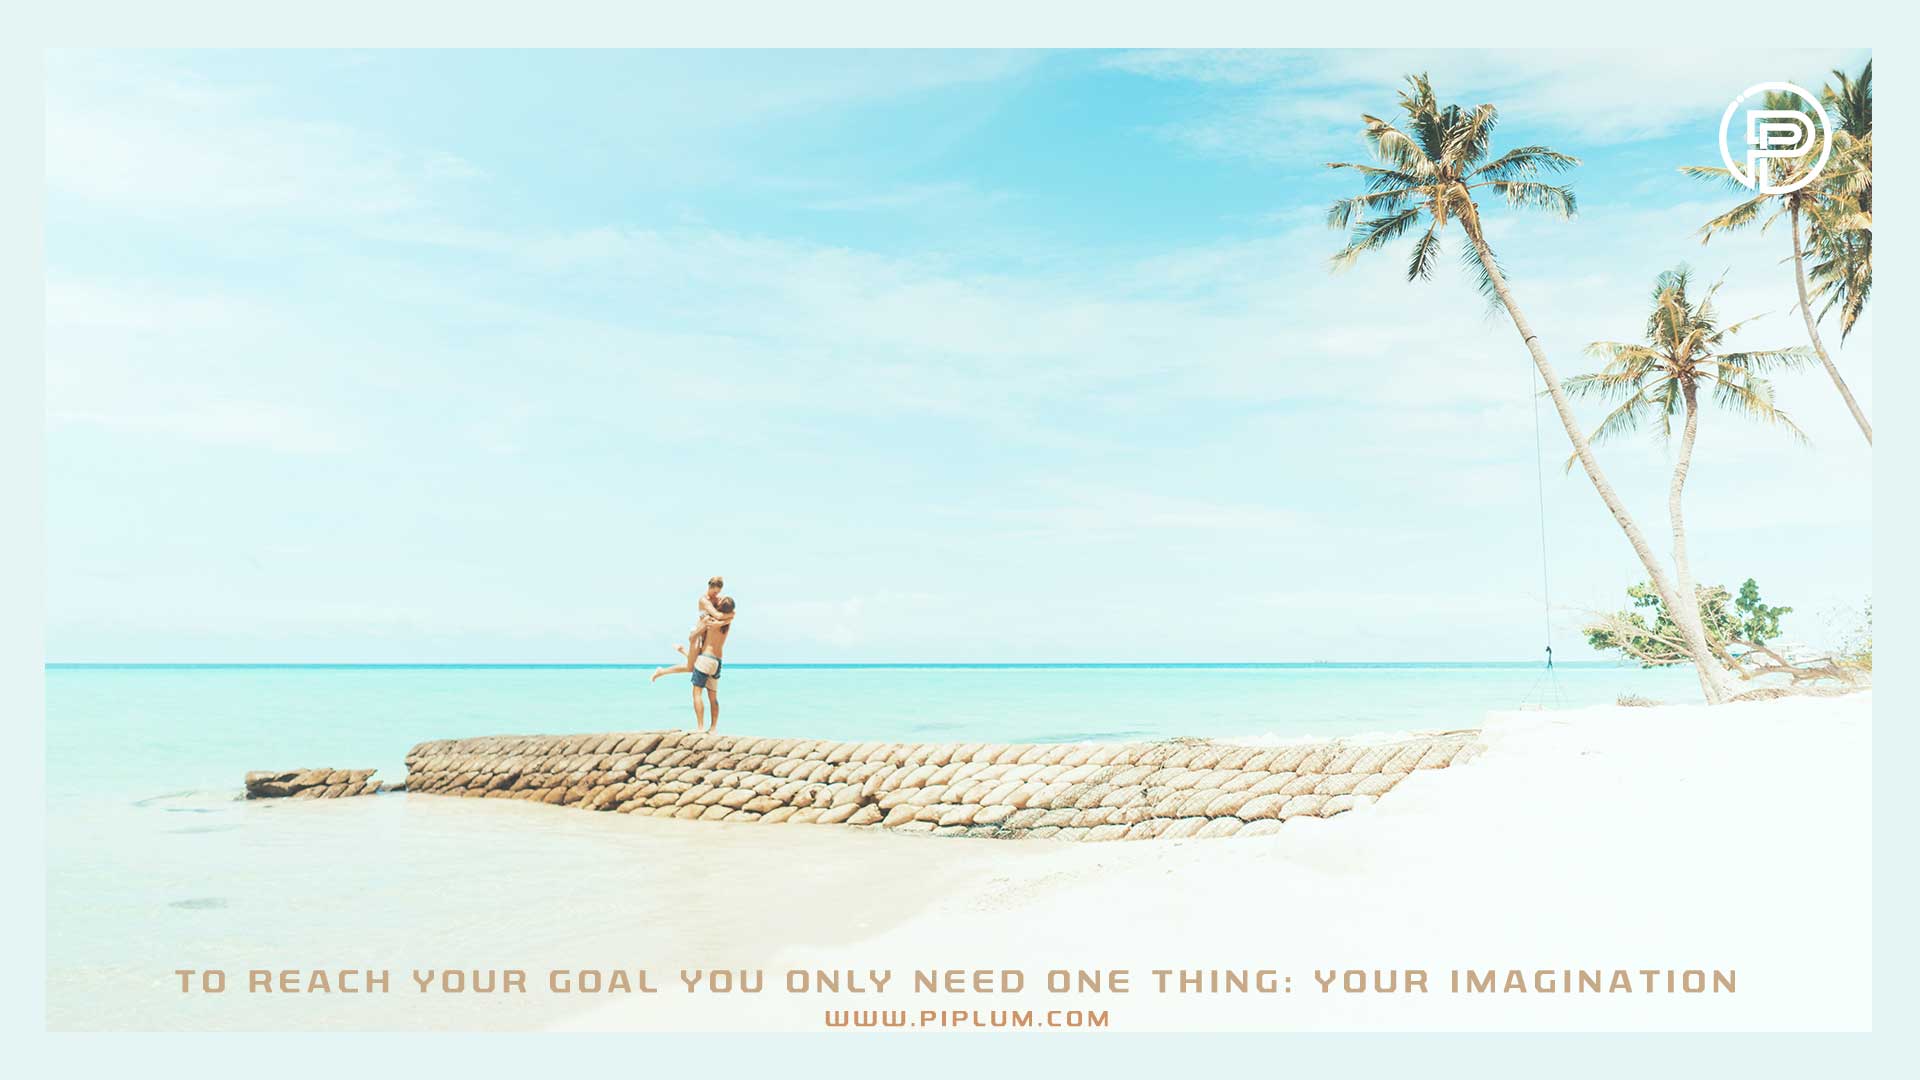 To-reach-your-goal-you-only-need-one-thing-your-imagination-Motivational-quote-beach-couple-palms-blue-sky-paradise